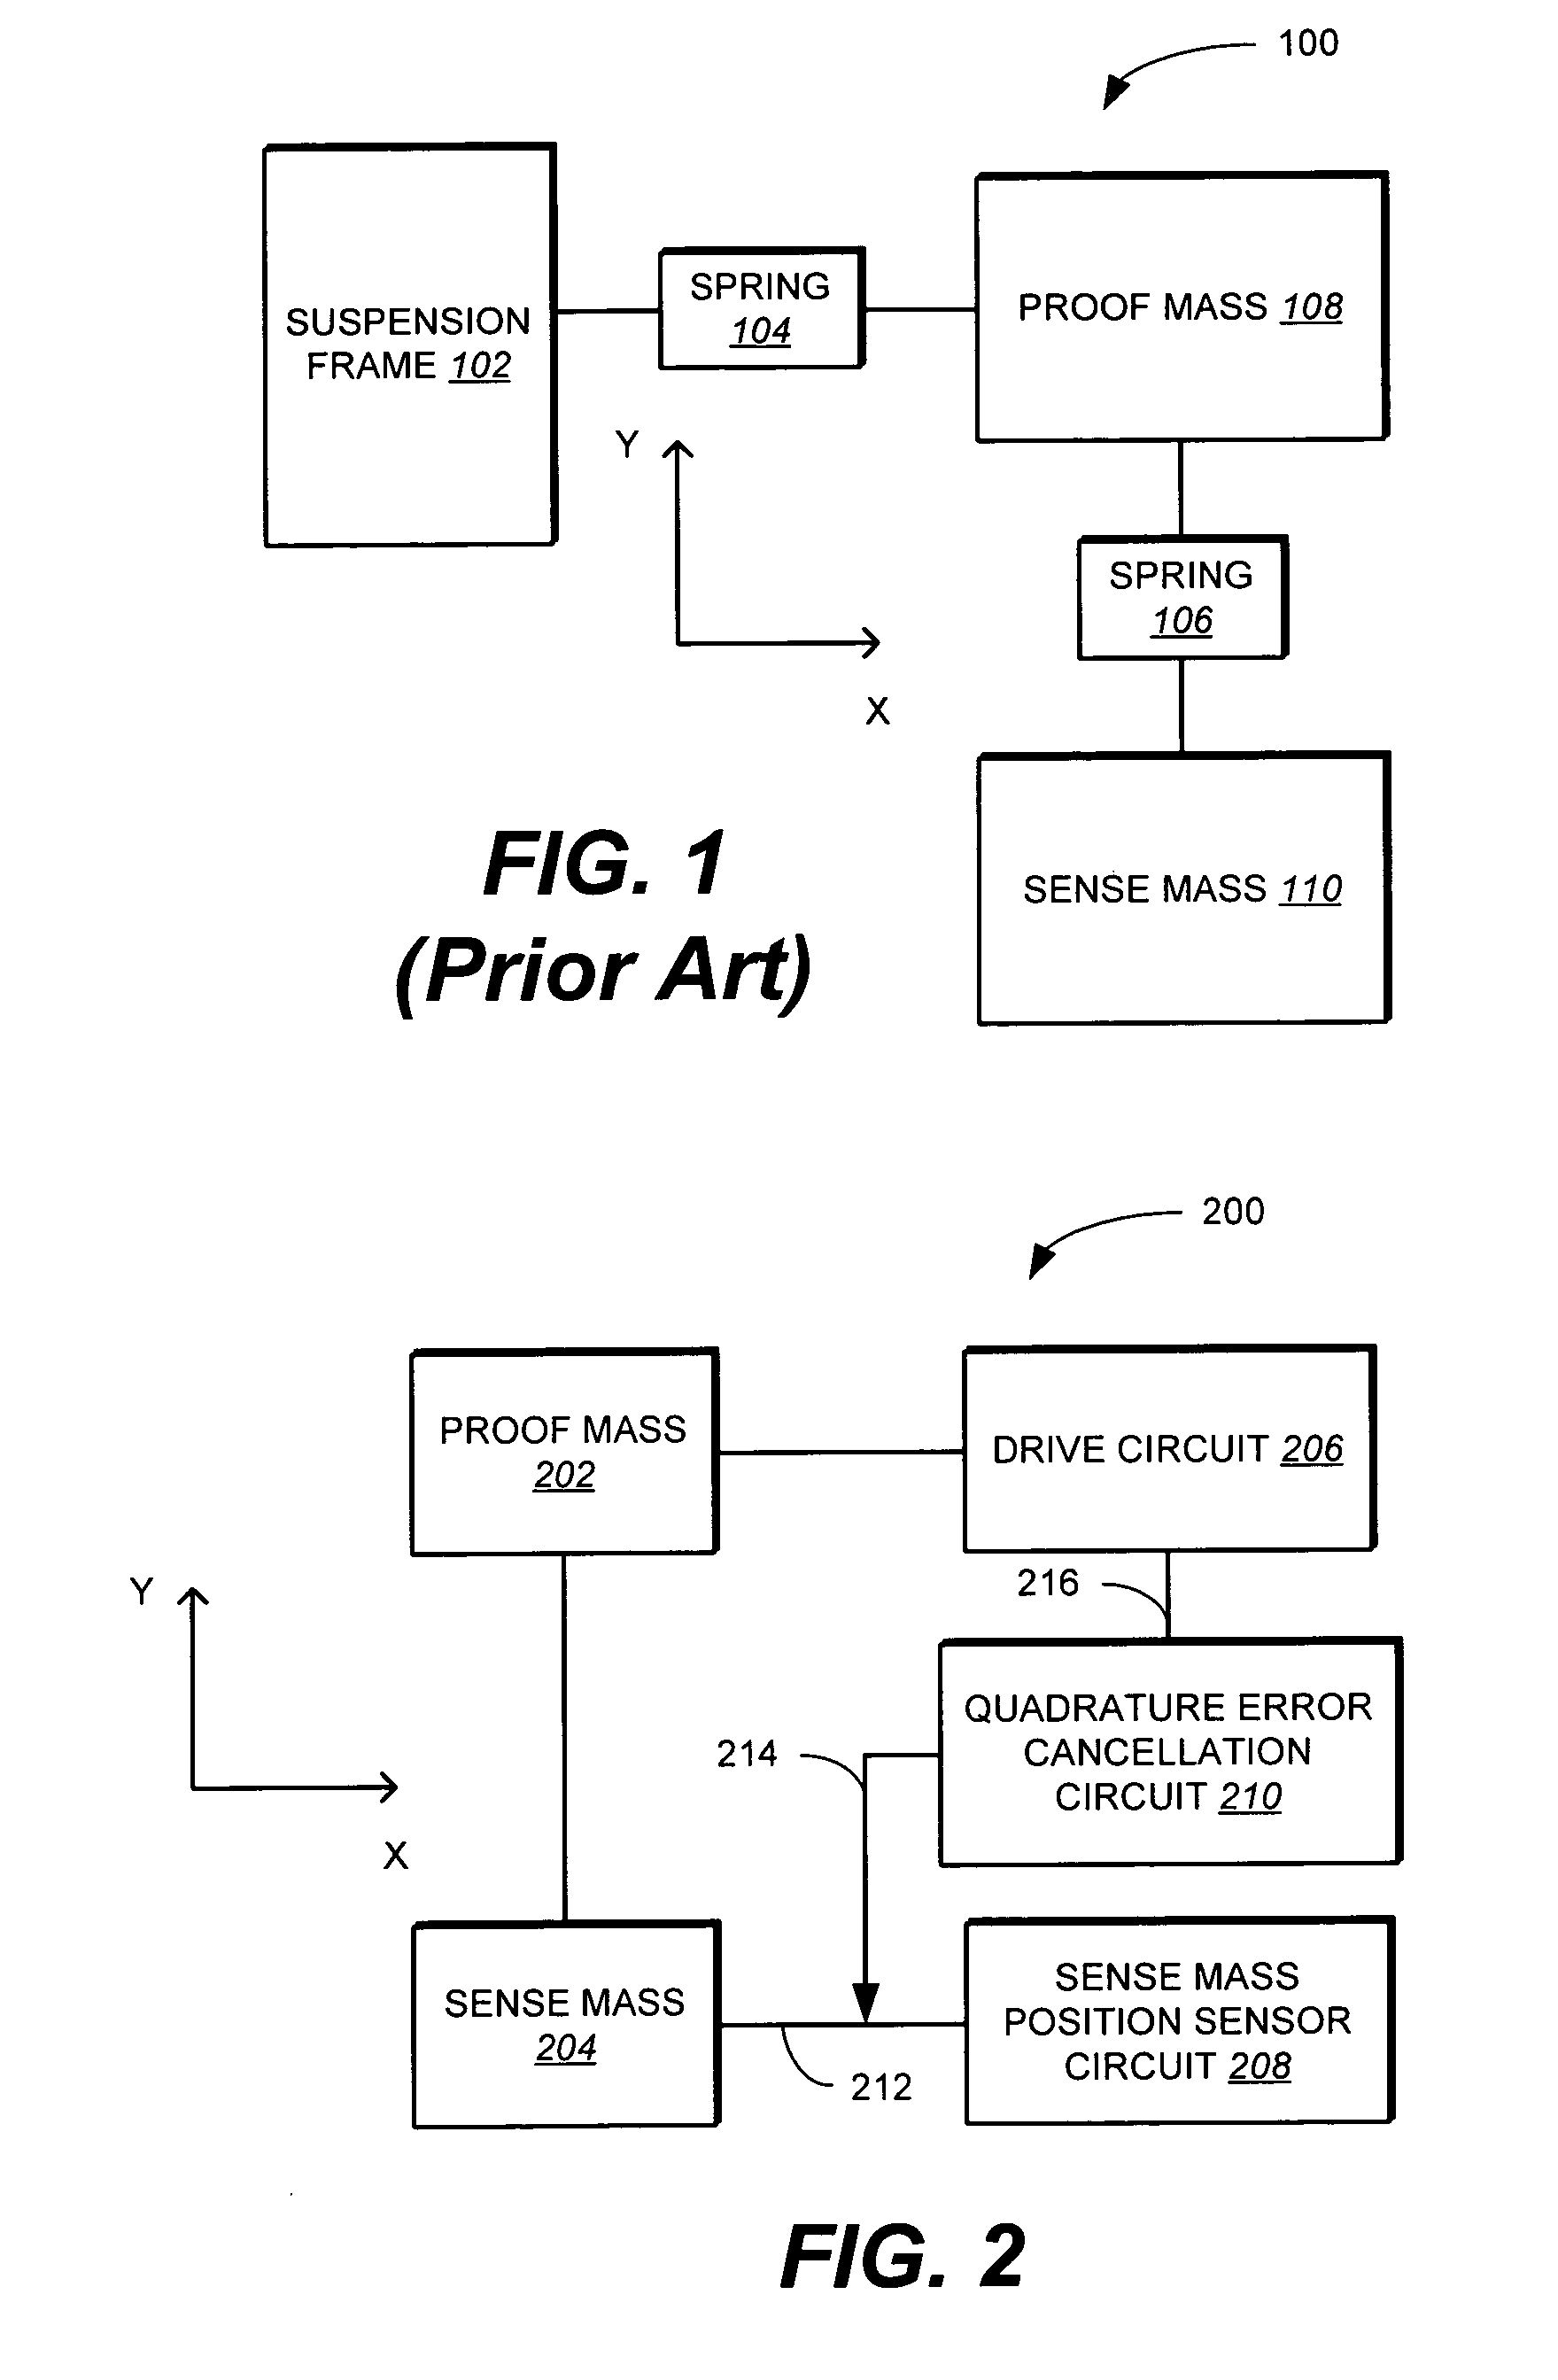 Method and apparatus for electronic cancellation of quadrature error